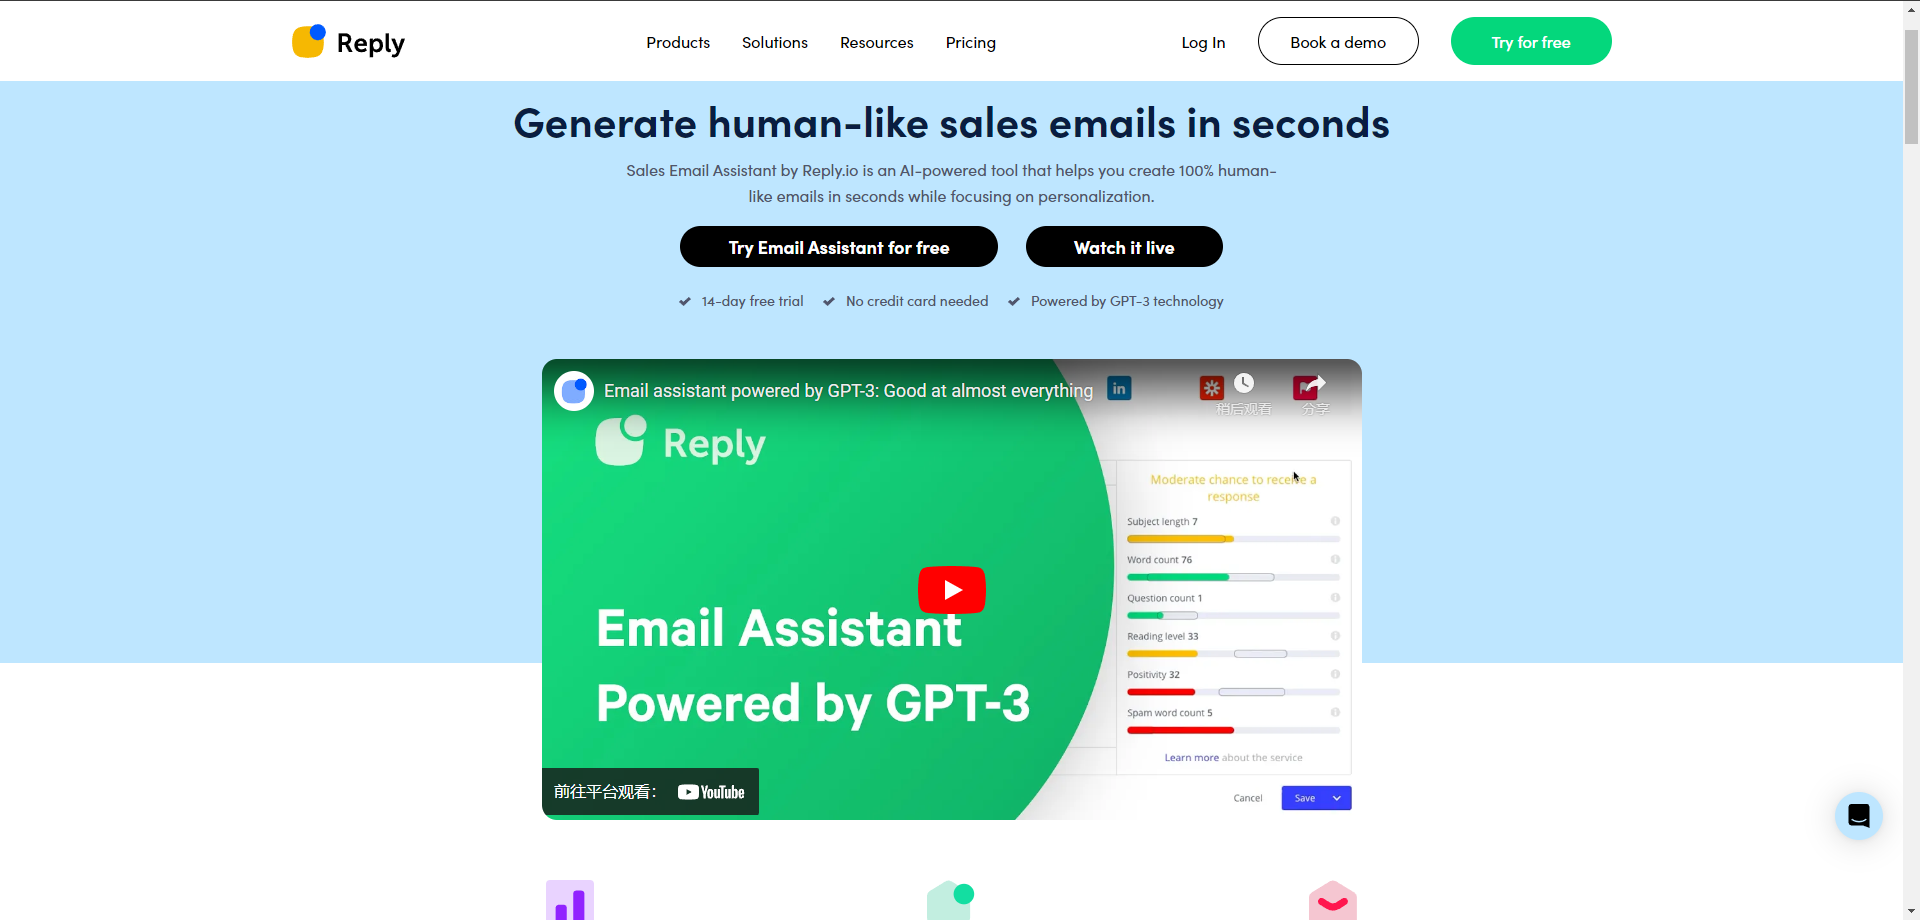 Reply.io's AI Sales Email Assistant